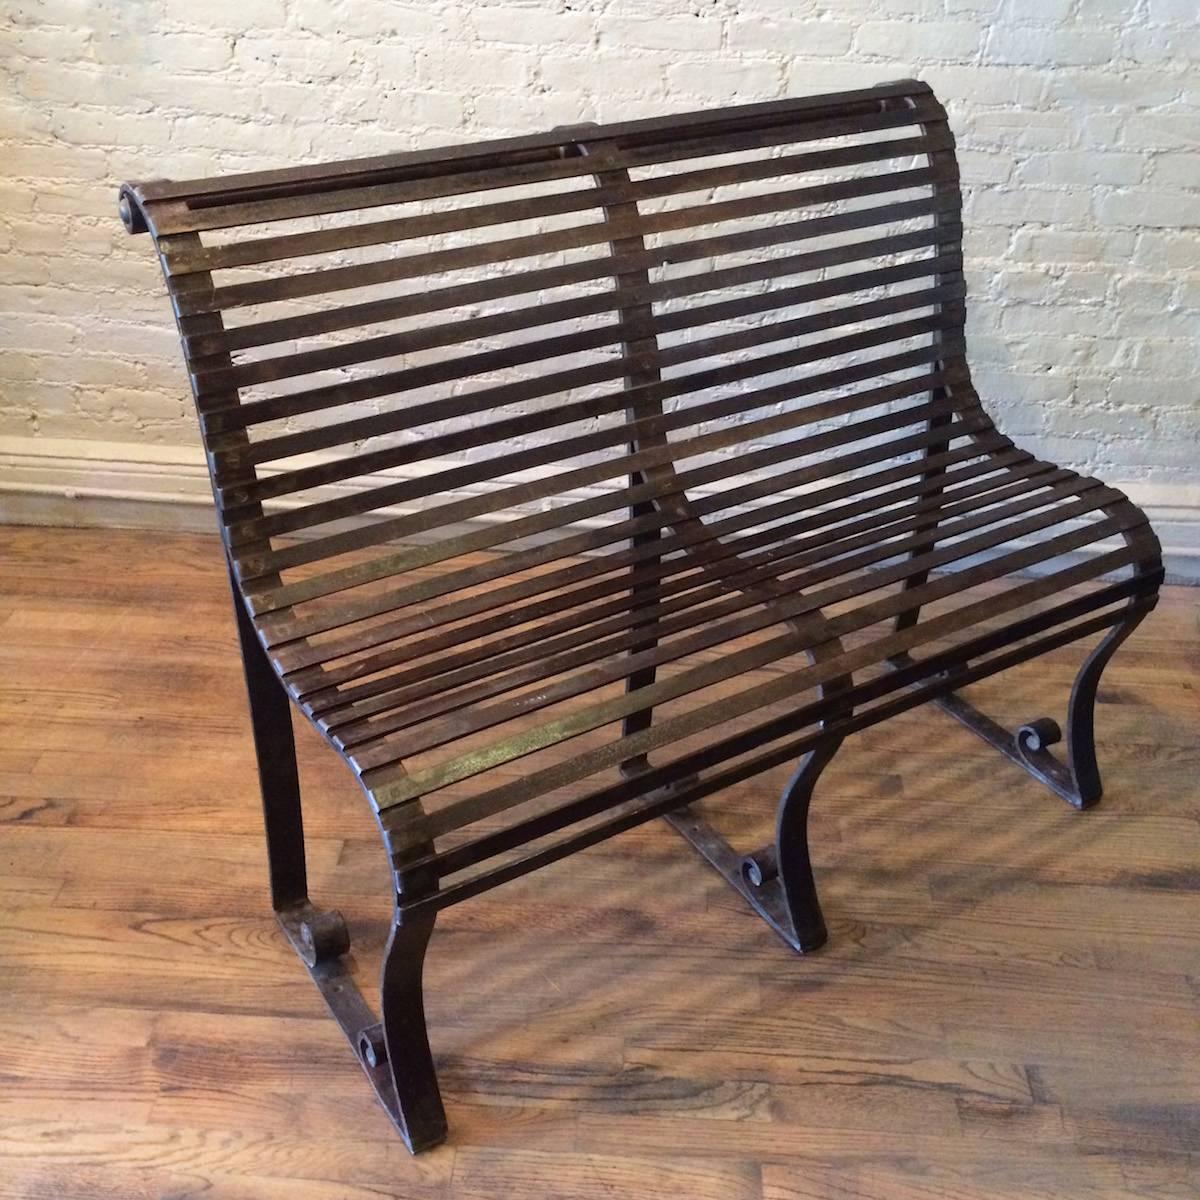 Late 19th century, Victorian park bench is  slatted wrought iron with scrolled accents. The bench bolts to the ground for stability.